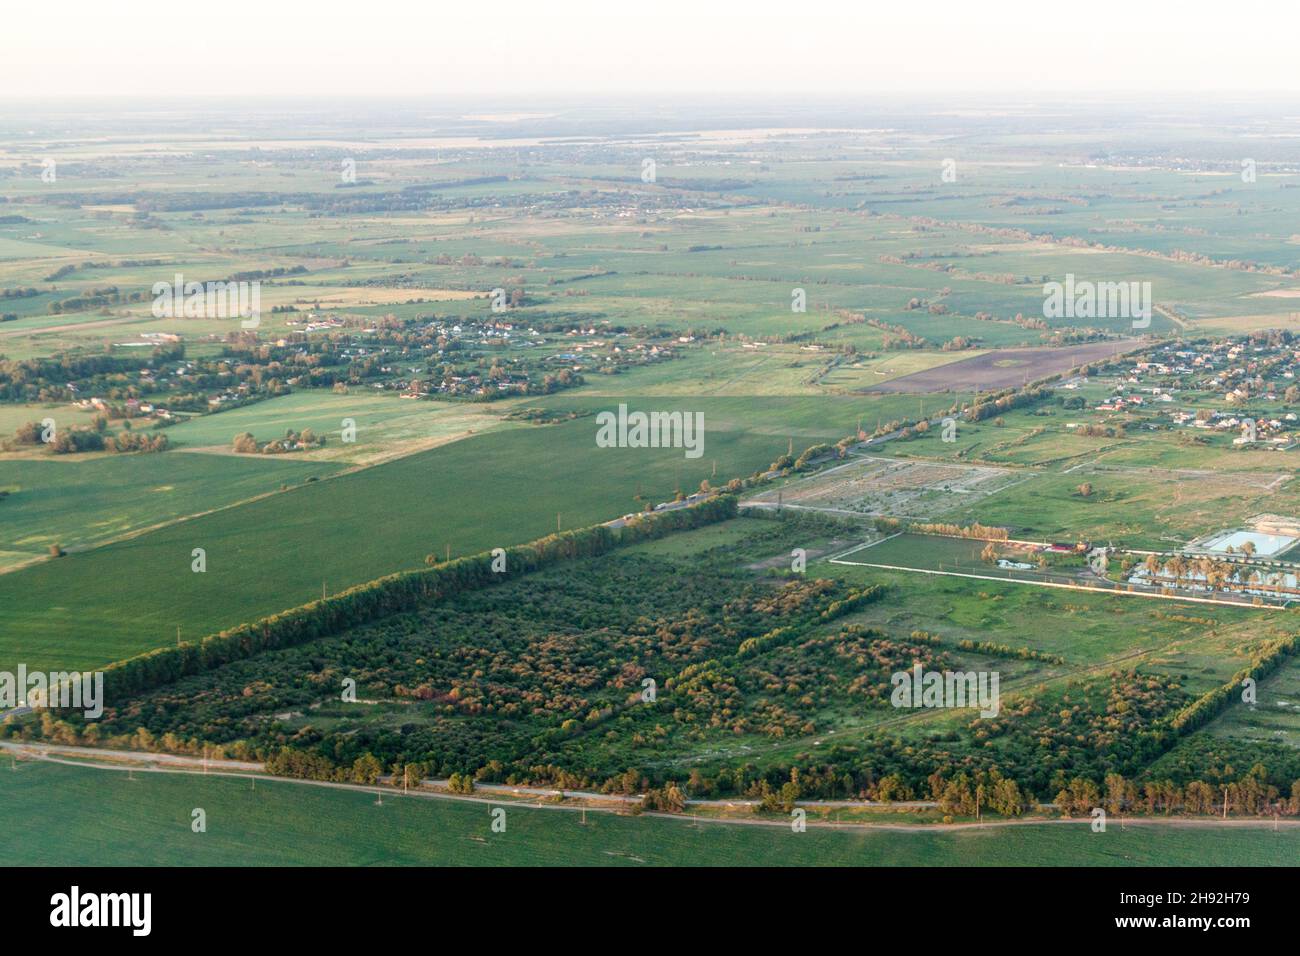 Aerial view of the landscape near Boryspil town, Ukraine Stock Photo